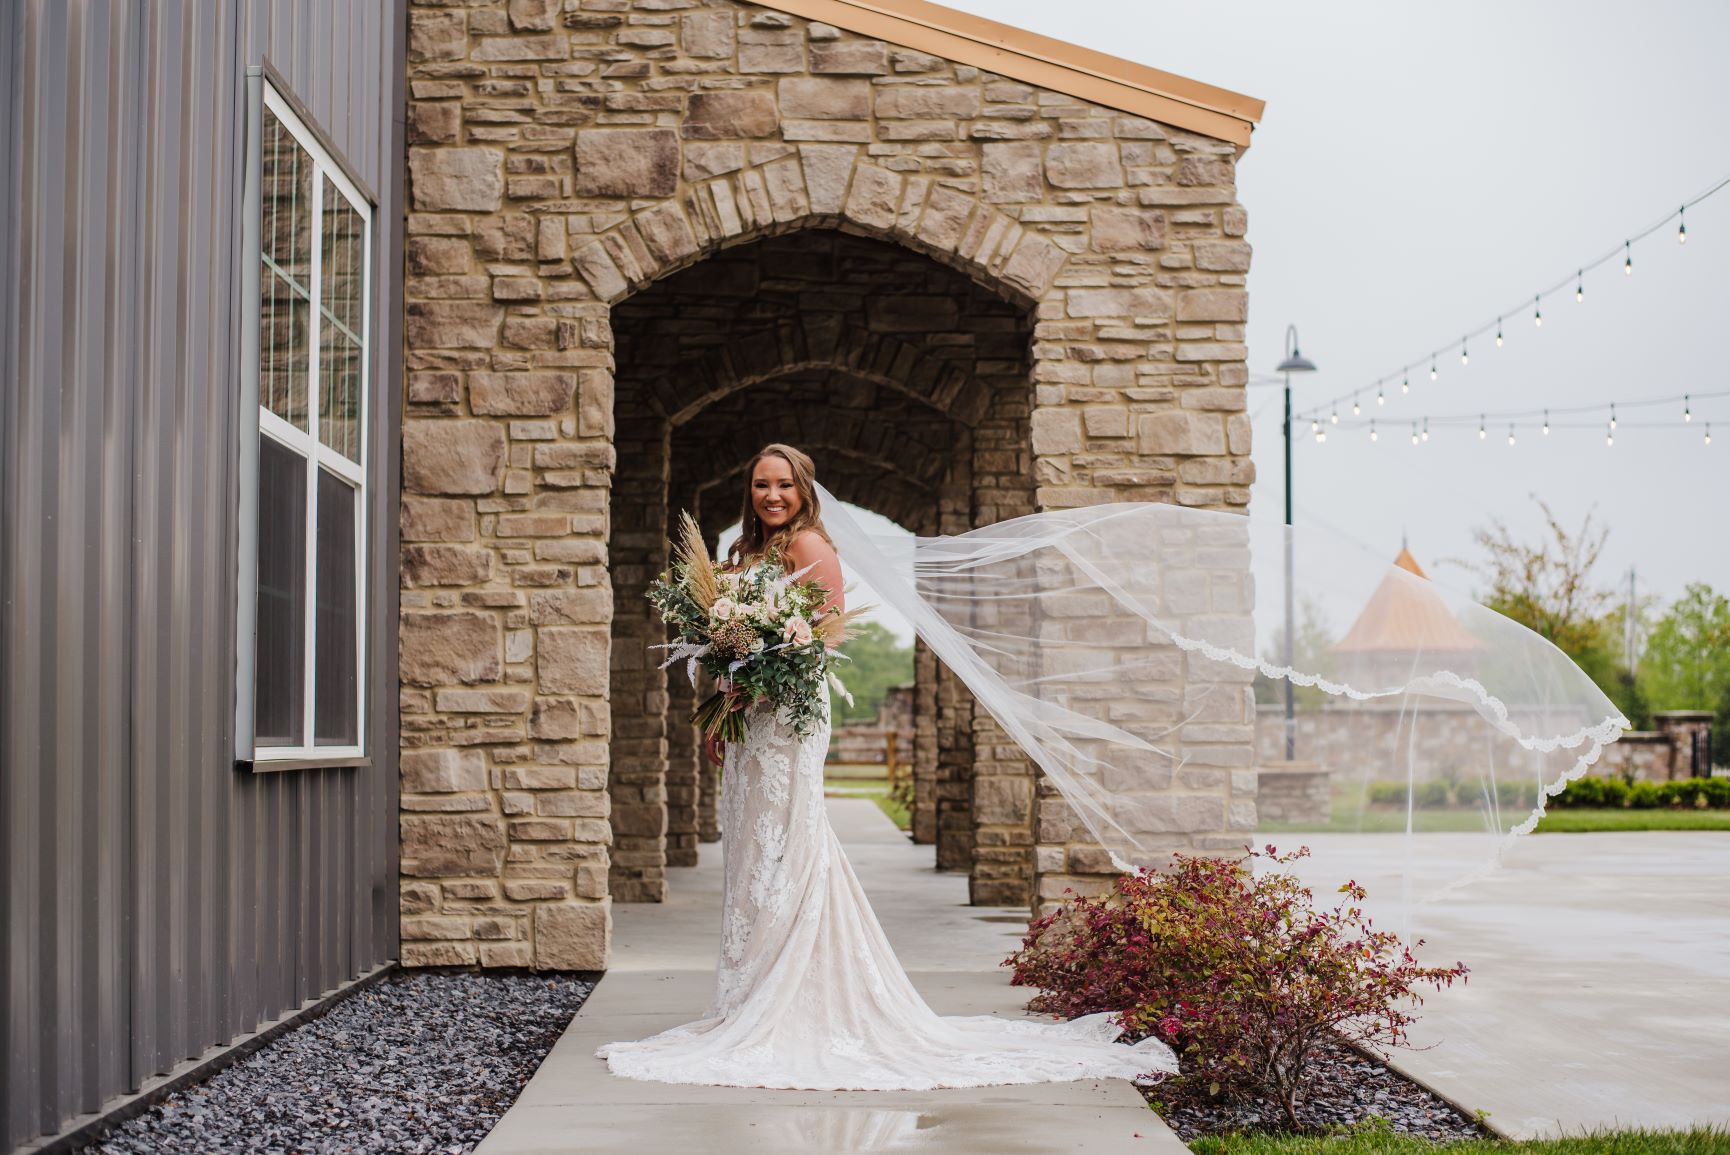 The Loft at Cherry Hill is another one of our newer Chattanooga wedding venues, boasting floor to ceiling windows that open up on the rolling hills of the Tennessee countryside for incredible views and natural light galore.